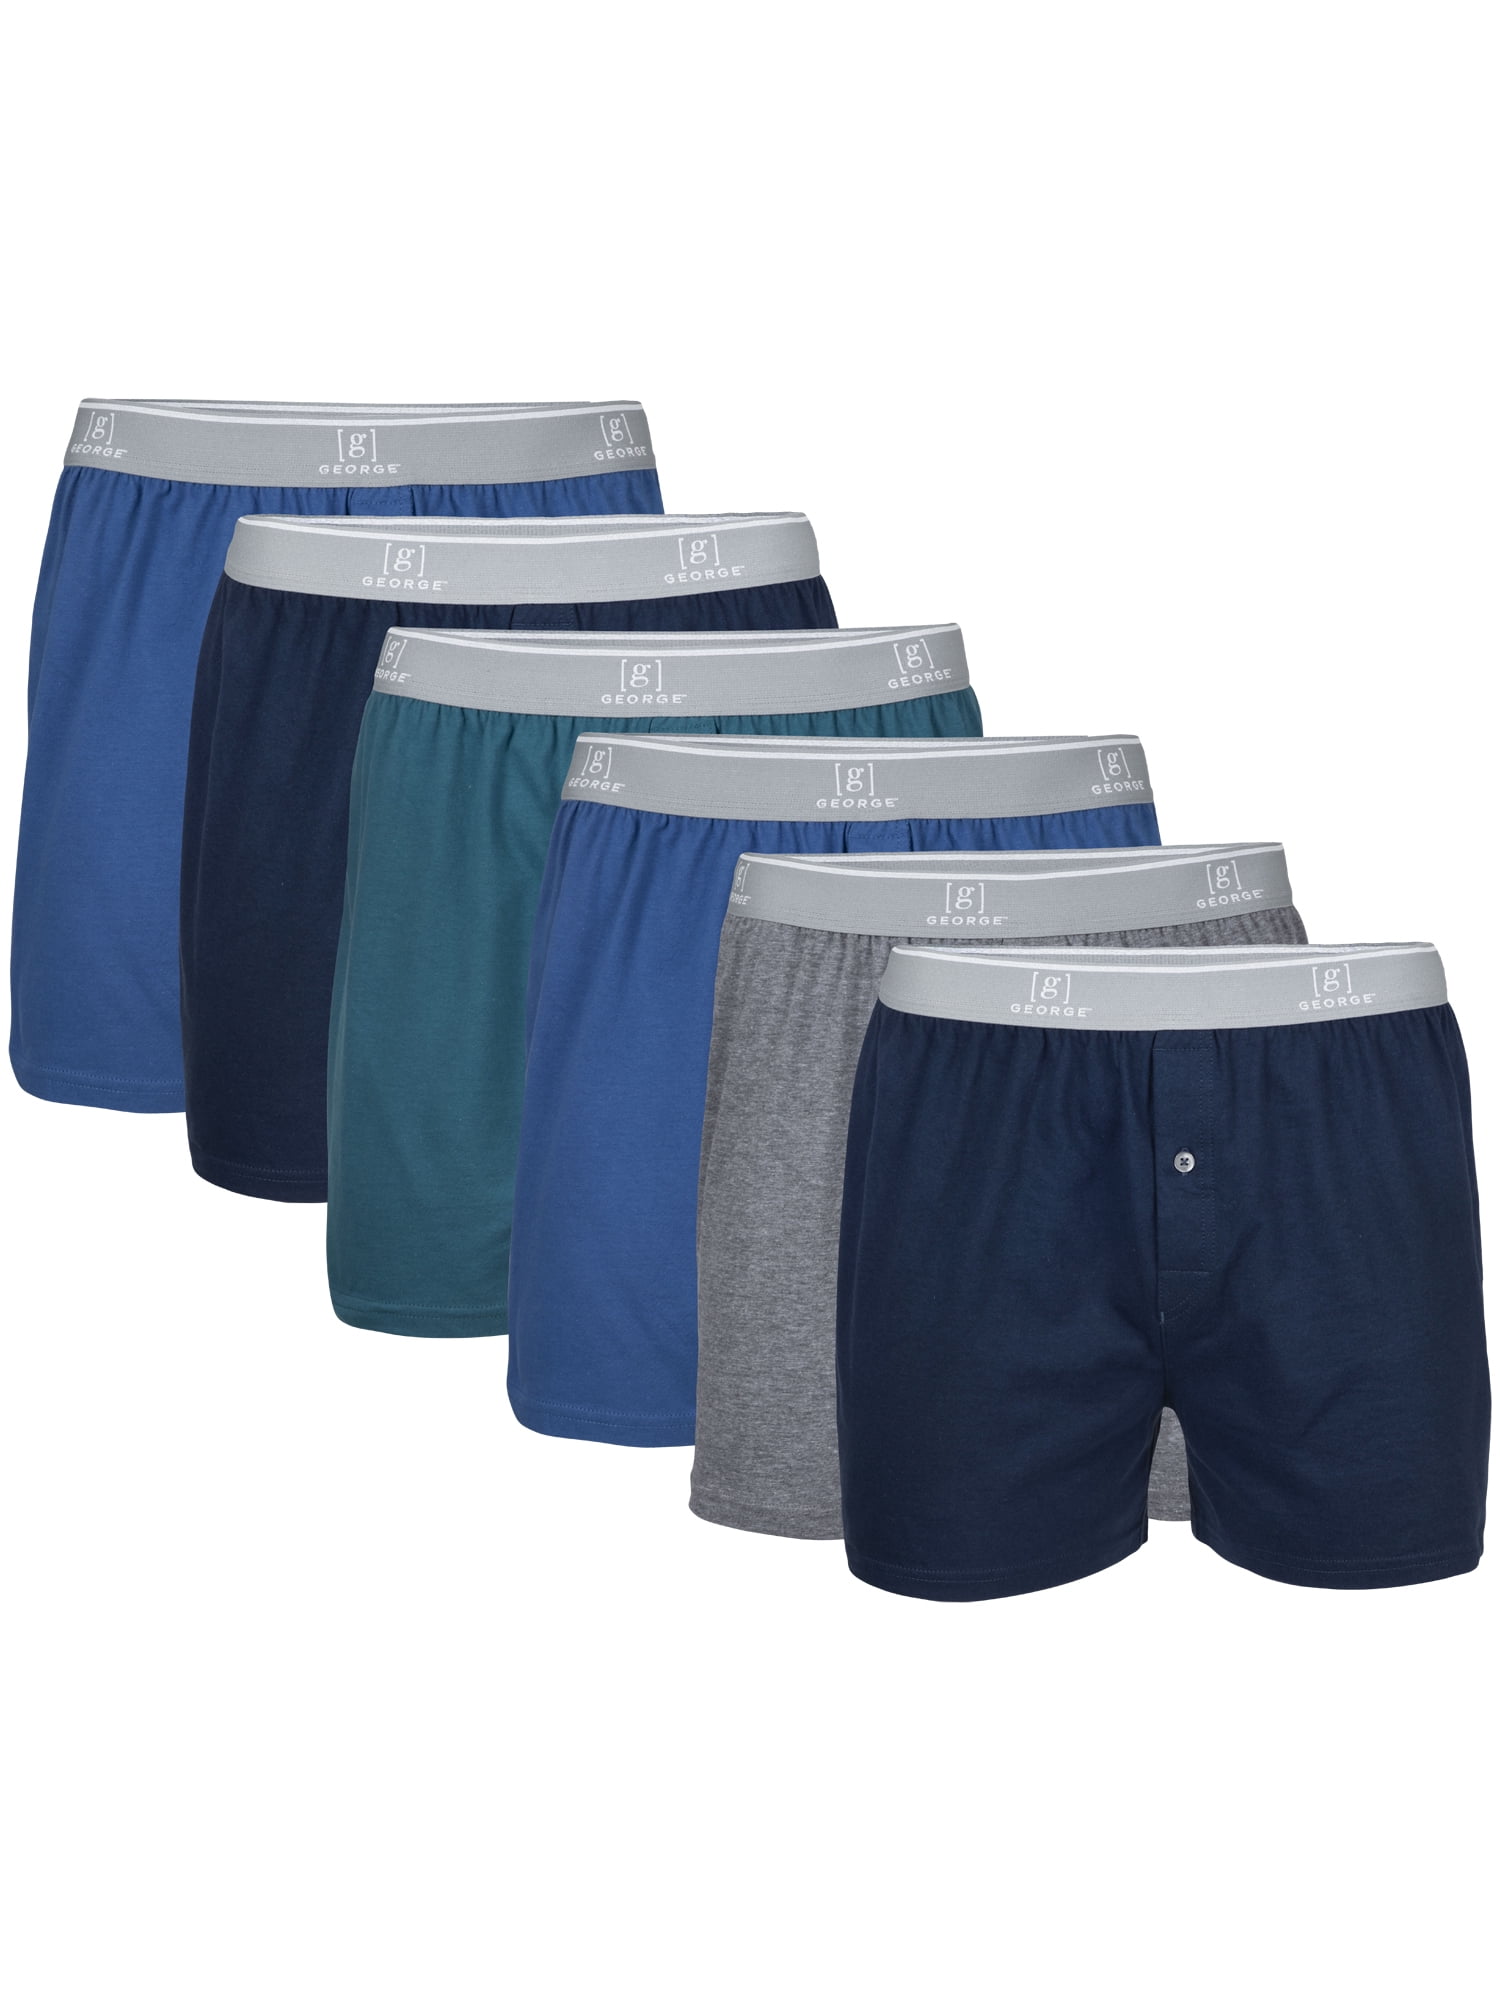 George Men's Knit Boxers, 6-Pack 